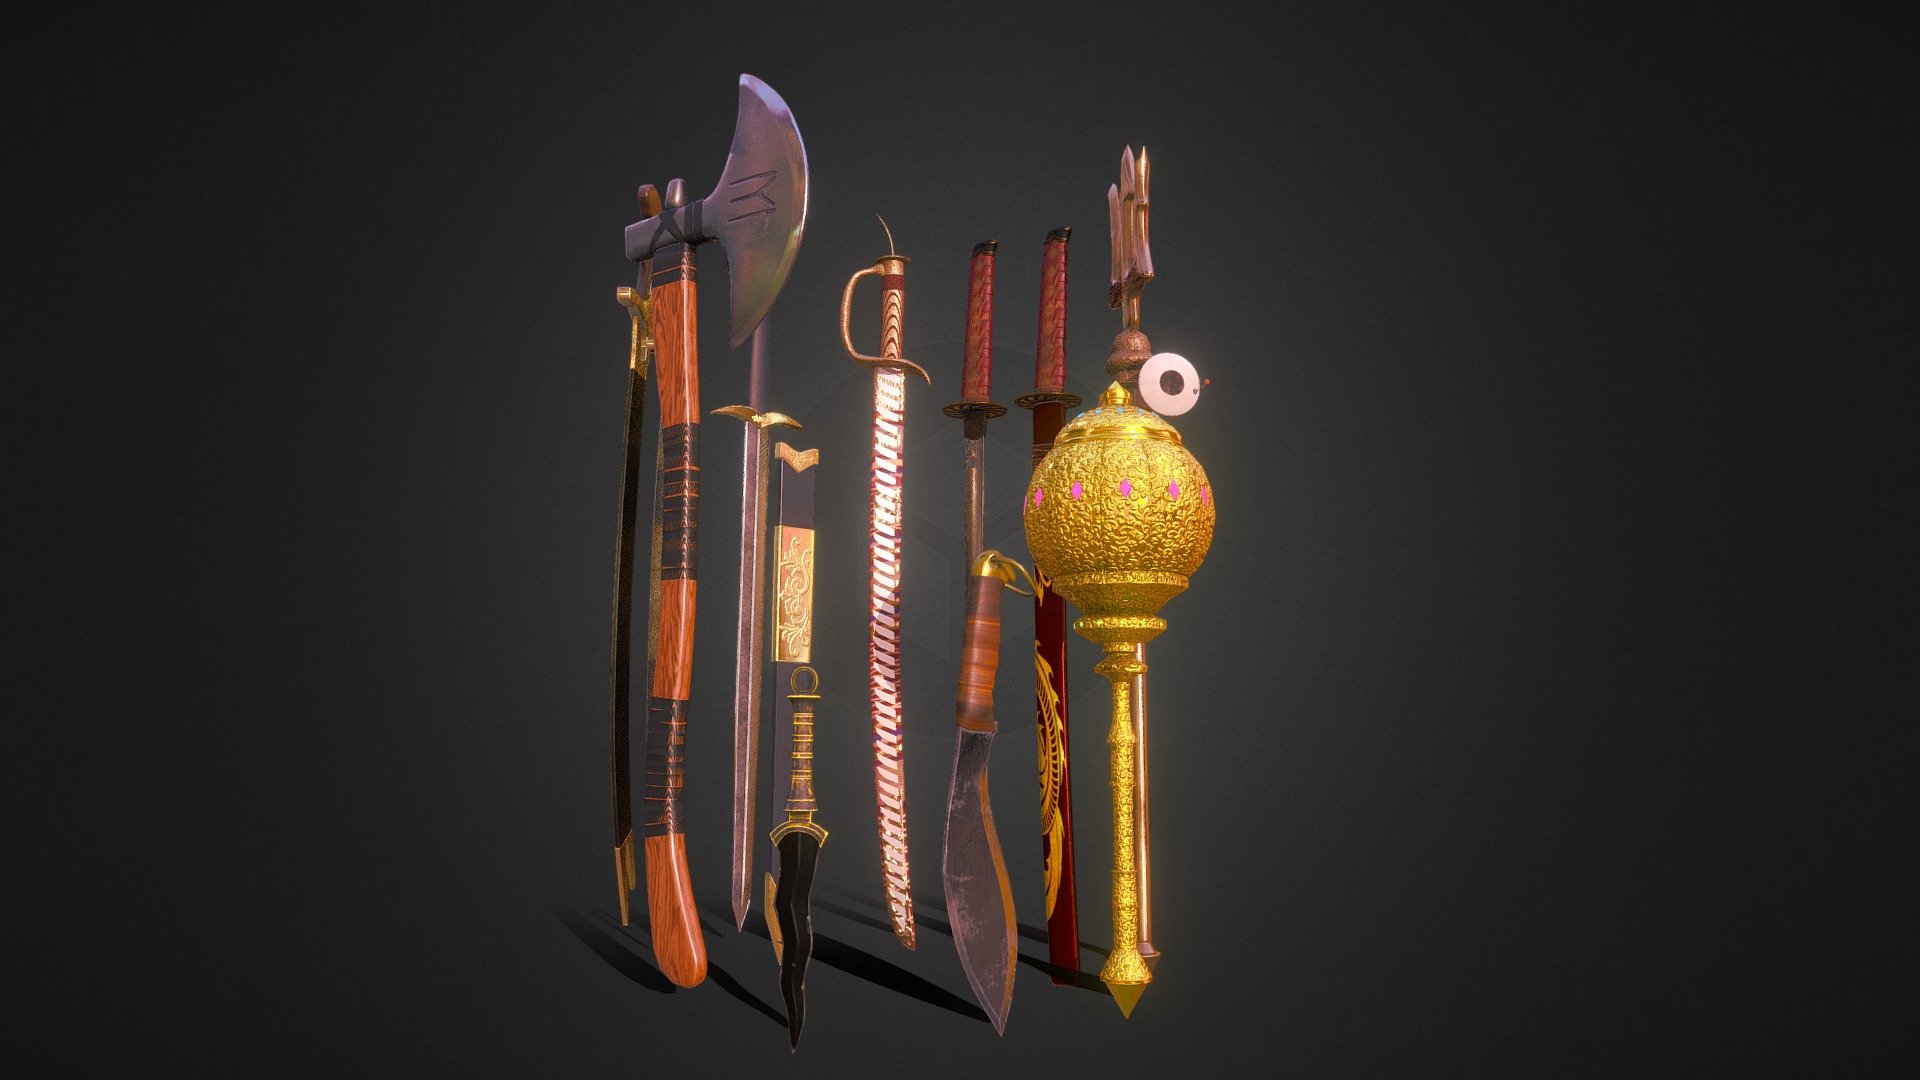 This weapon pack contains The historic weapons which can be used for games and are Low Poly weapons. Clean UV's For each mesh and clean topology.
Can be used for Mods, Commercial/Non-Comercial Purpose.

Names Of Weapons 




Hanuman Gada (Mace) - 4204 Poly

Kukri Machete - 2209 Poly

Karambit Dagger-  2989 Poly

Turgut Alp Axe - 8920 Poly

Zulfiqar Sword - 11074 Poly

Kai Village Sword - 2590 Poly

Shivaji's Bhavani Sword - 14029

Katana - 8337

Lord Shiva's Trishul - 5576
 - Realistic Historic Melee Weapon Pack - Buy Royalty Free 3D model by OrnaLabs 3d model